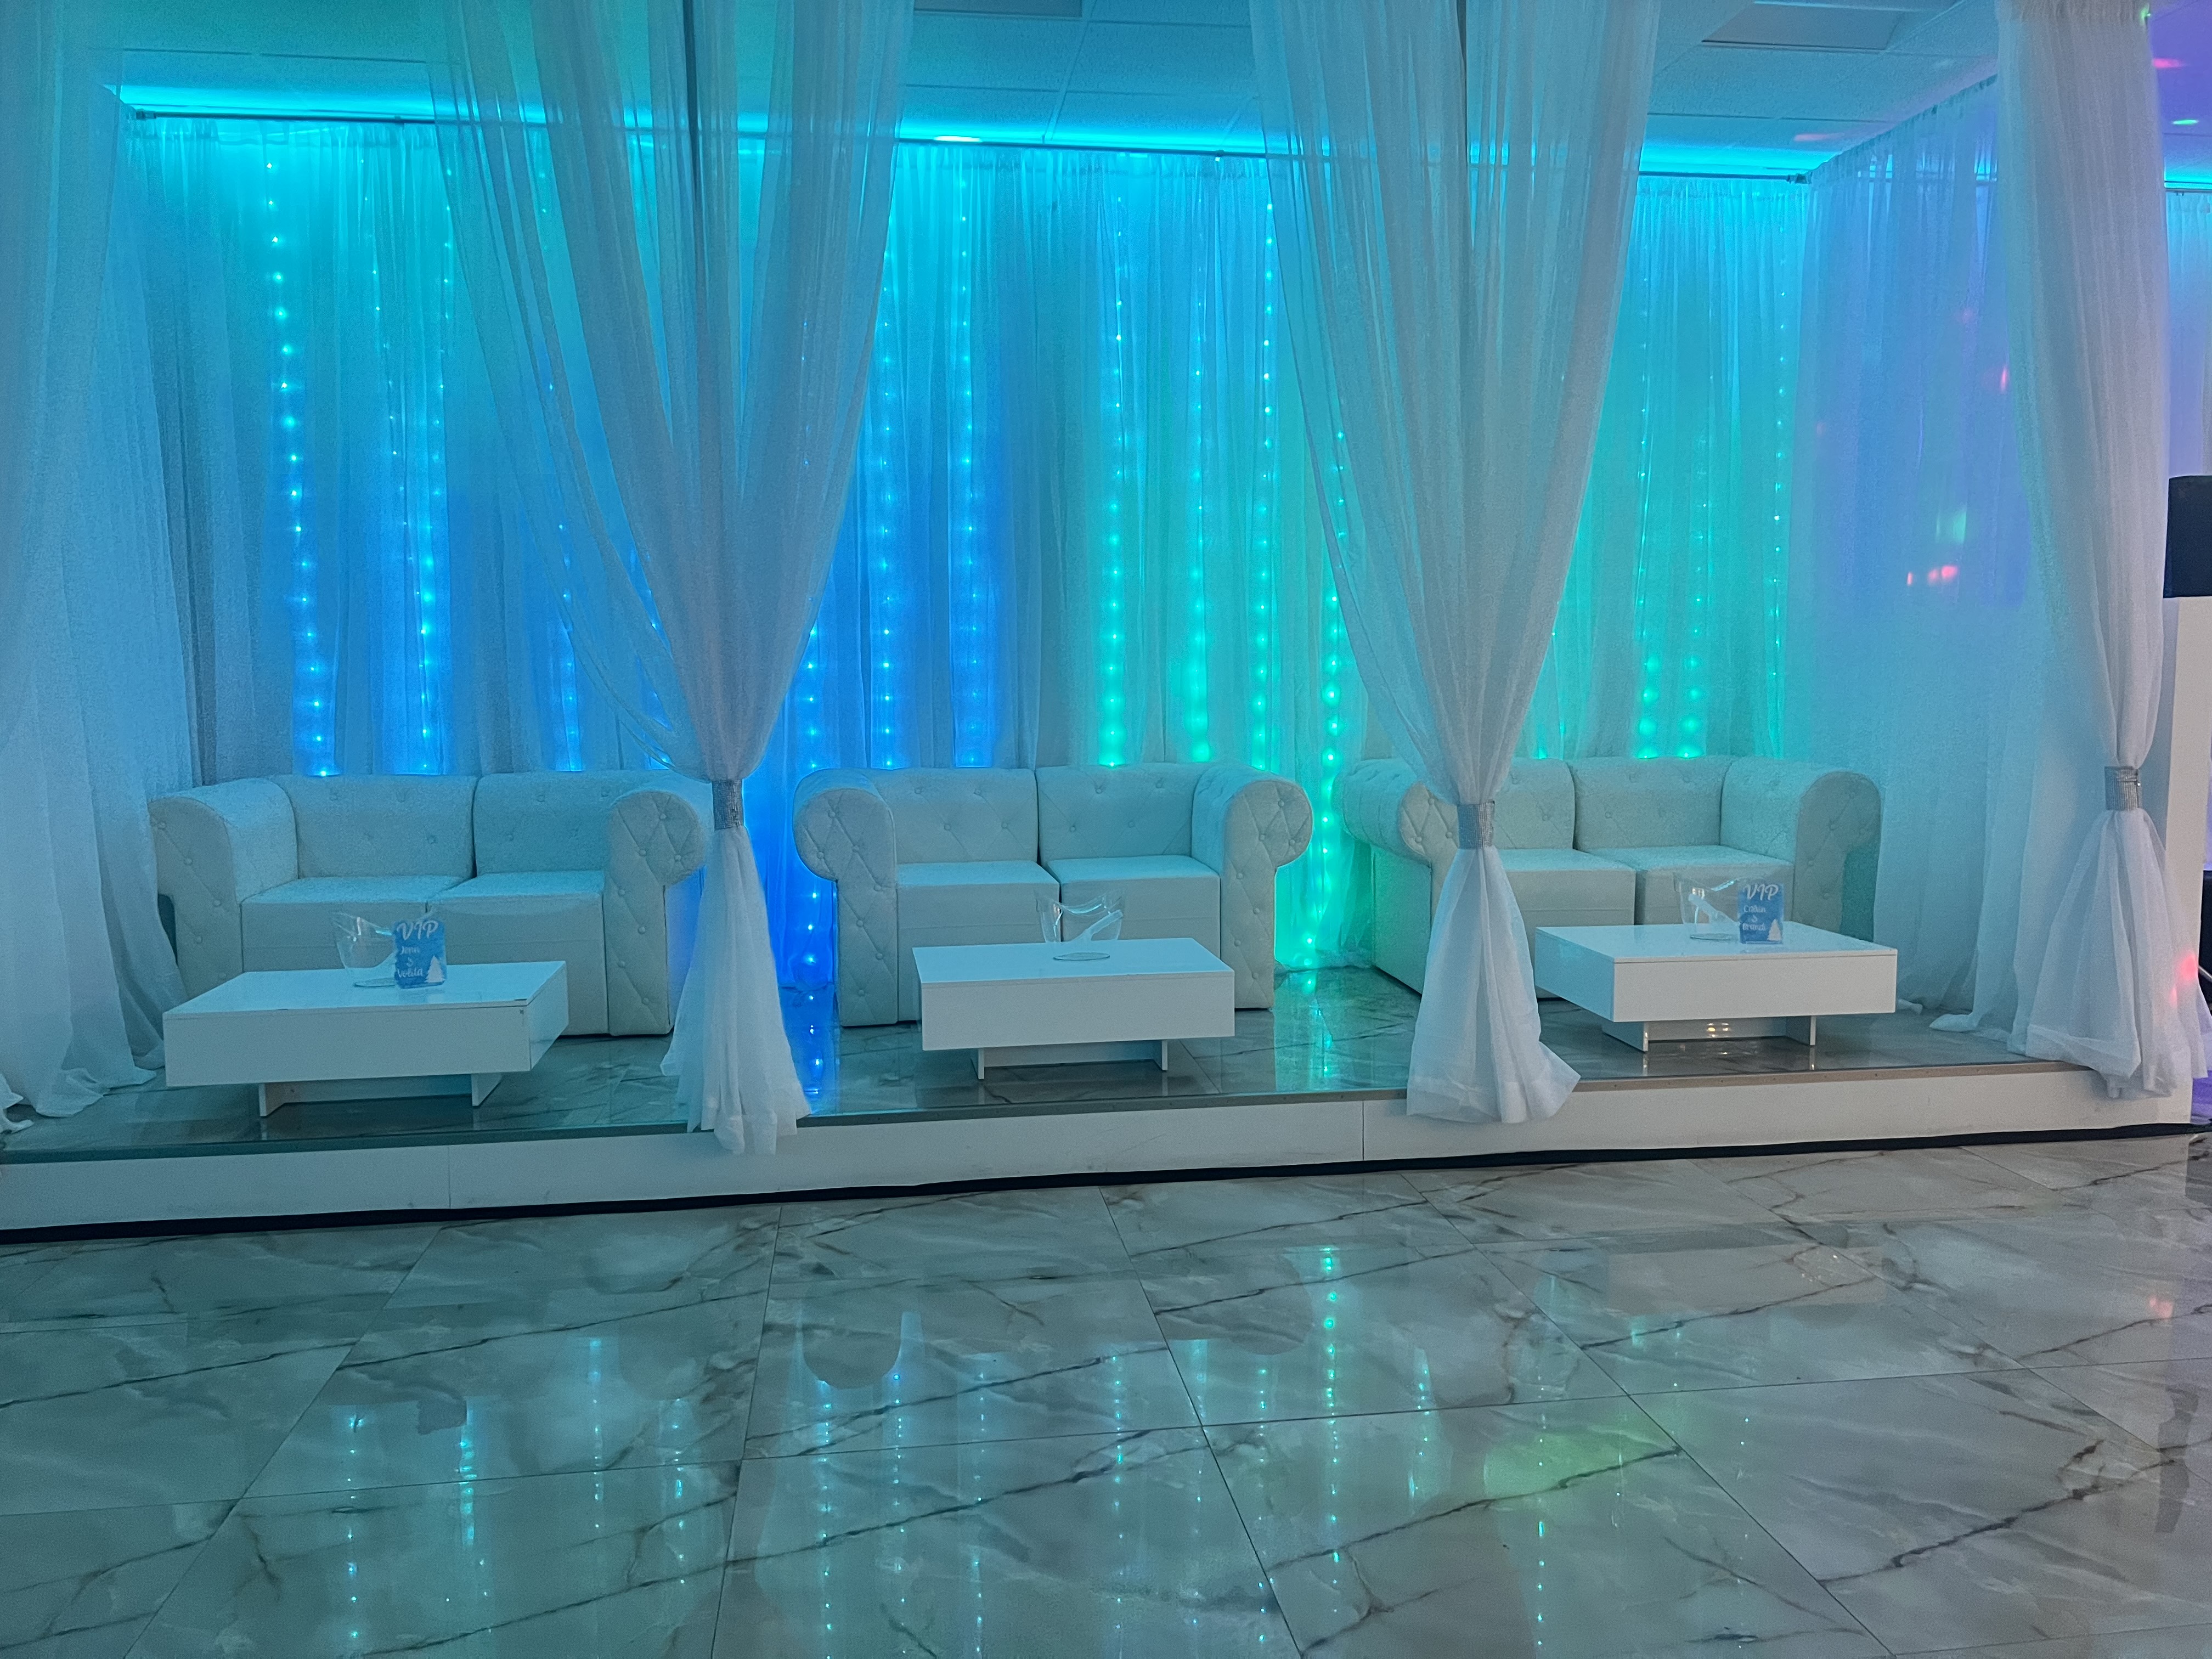 An elegant event hall featuring a long white sofa, matching tables, and draped curtains, all illuminated by a vibrant blue led light wall.